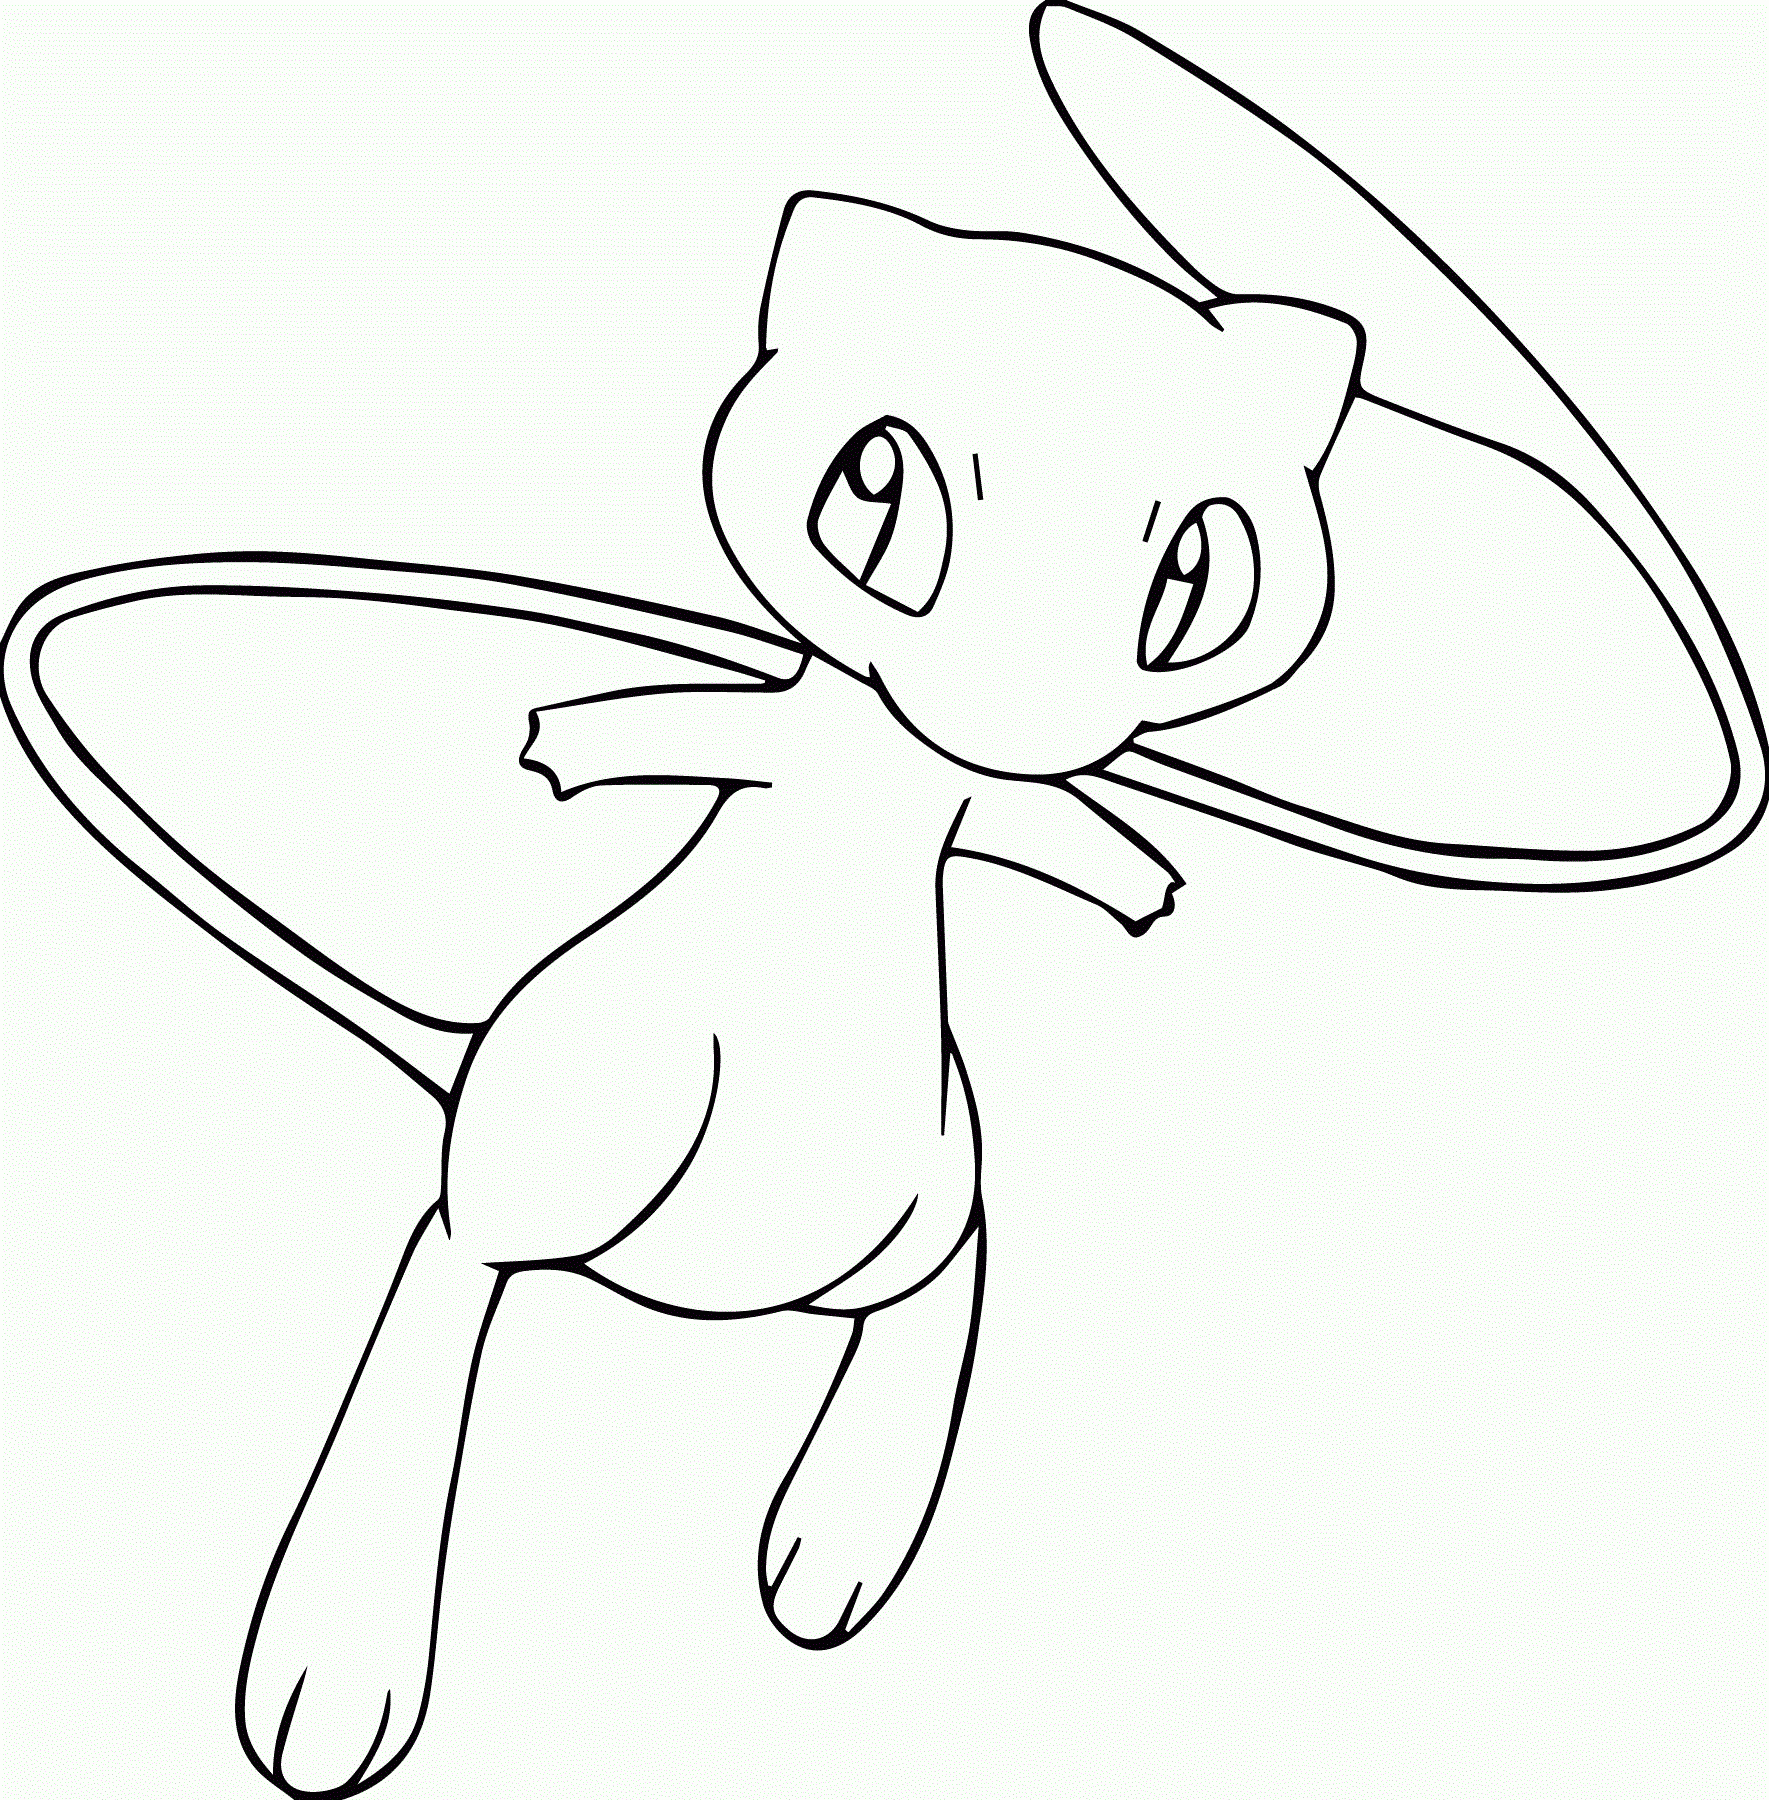 45+ Nice Pict Mew Pokemon Coloring Pages / Famous Pokemon Coloring Red avec Dessin Pokemon Mew